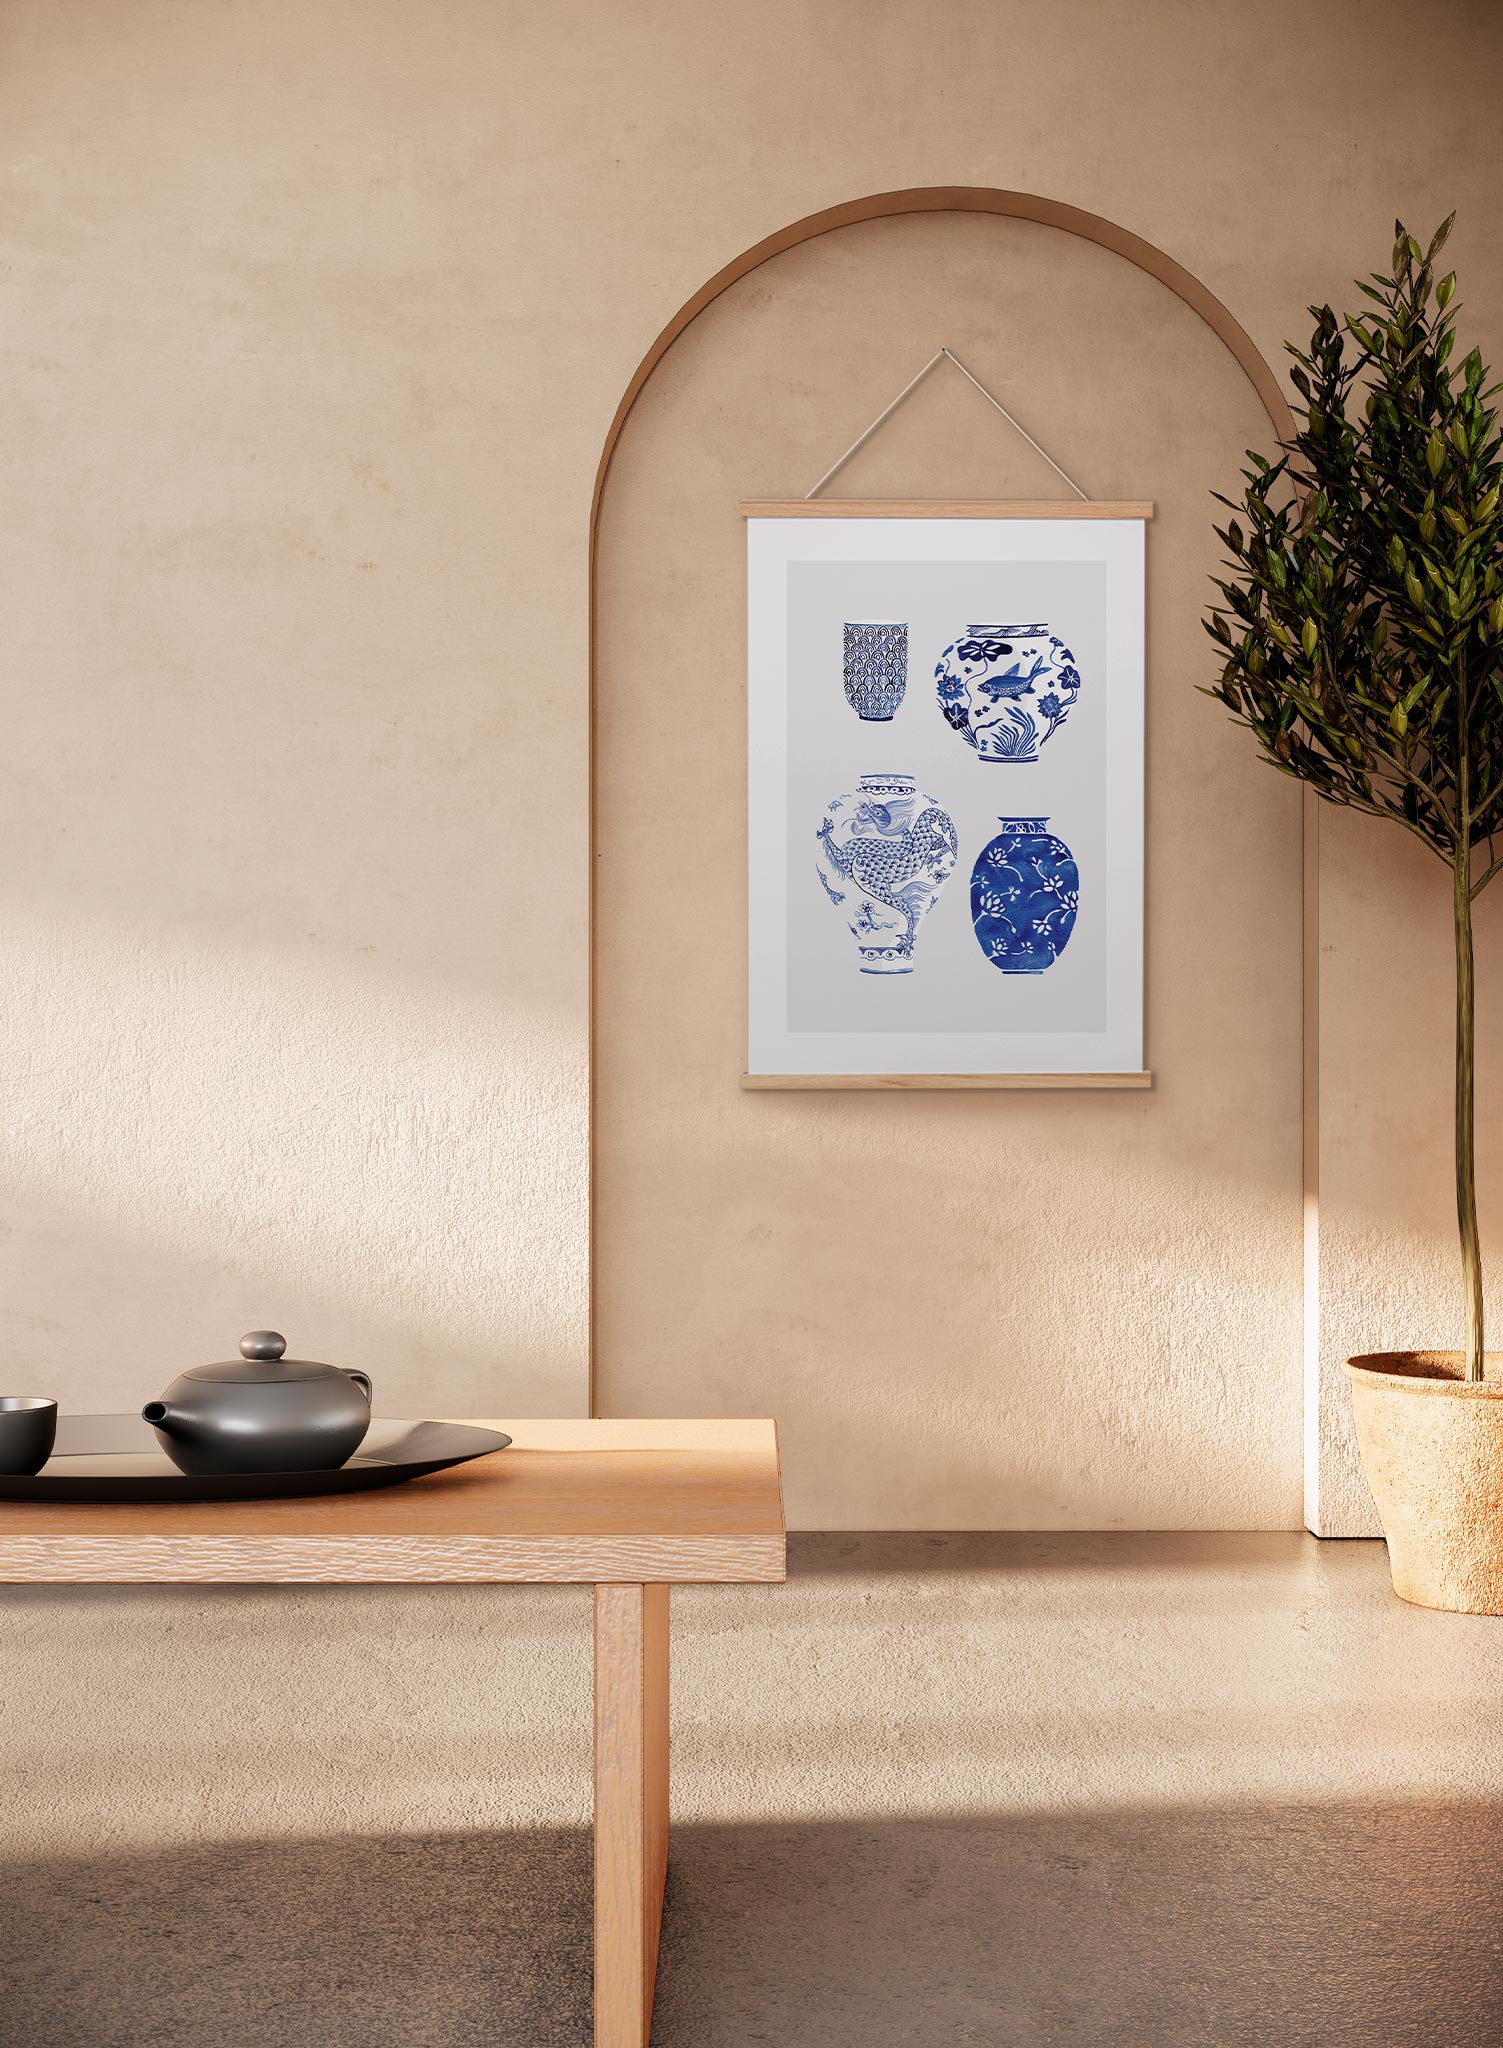 Tojiki is a minimalist illustration by Opposite Wall of four big blue vases with different patterns.